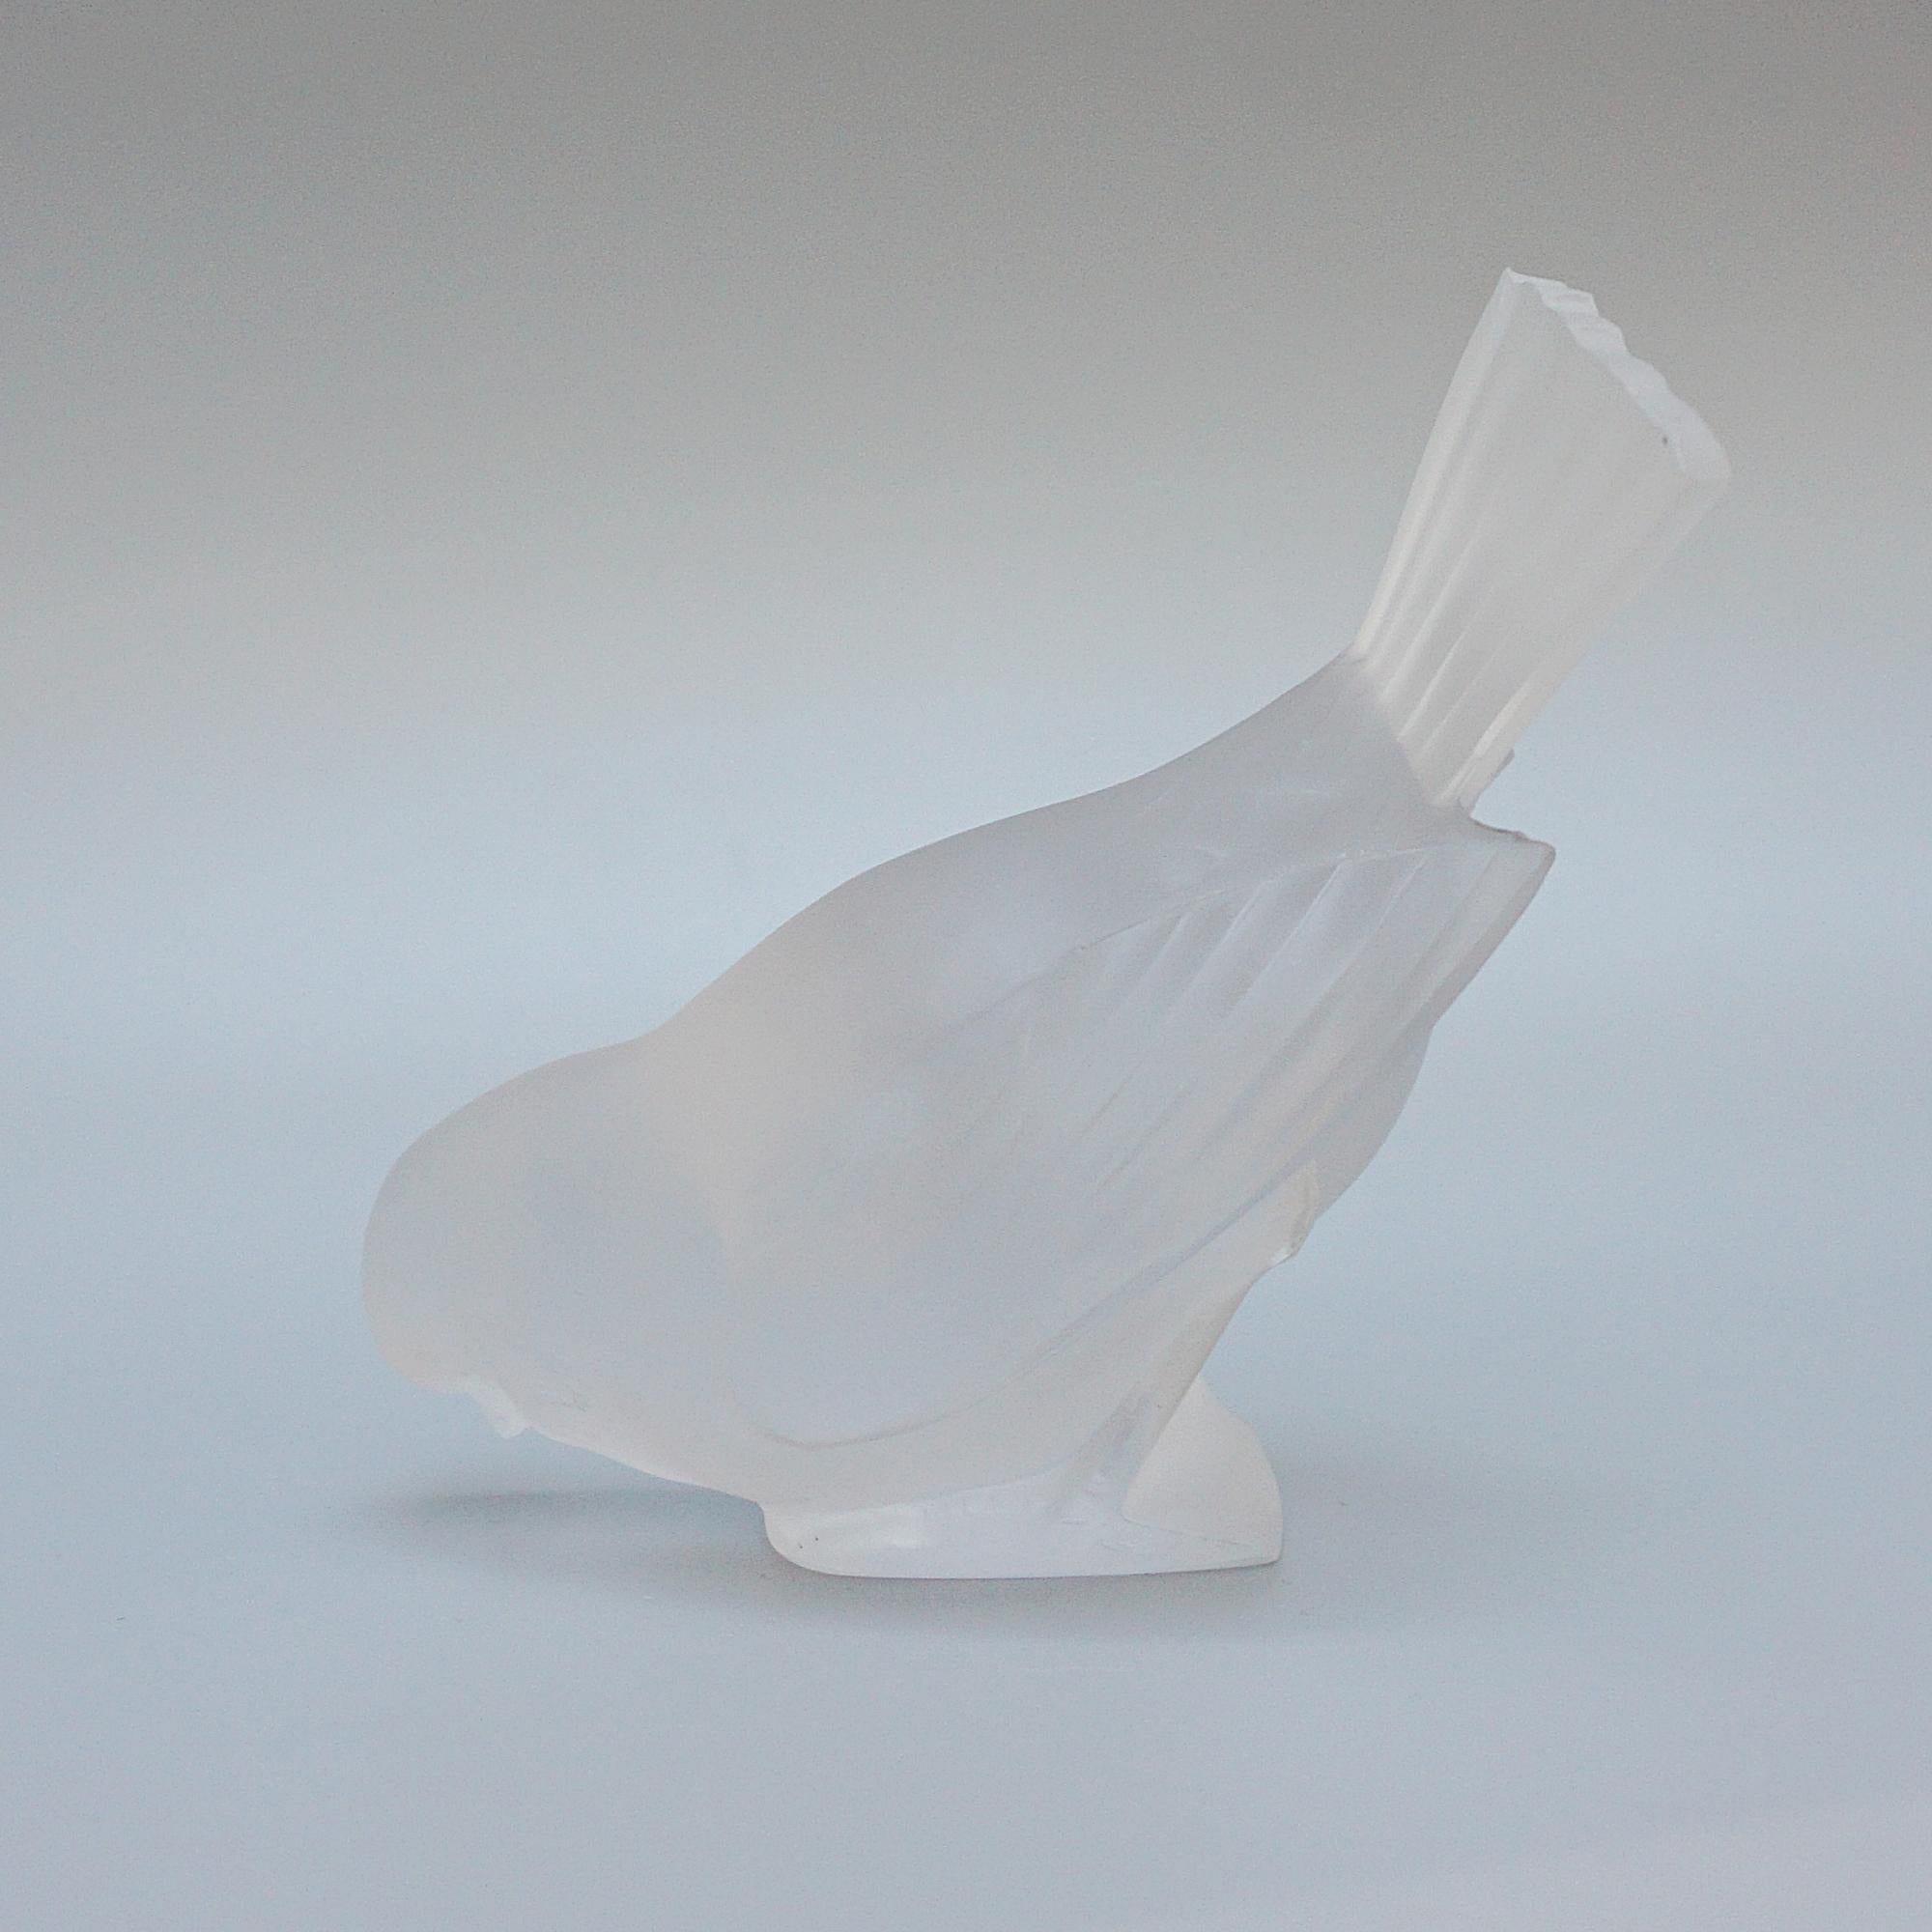 'Moineau Timide' A Glass Paperweight by Marc Lalique (1900 - 1977) For Sale 4